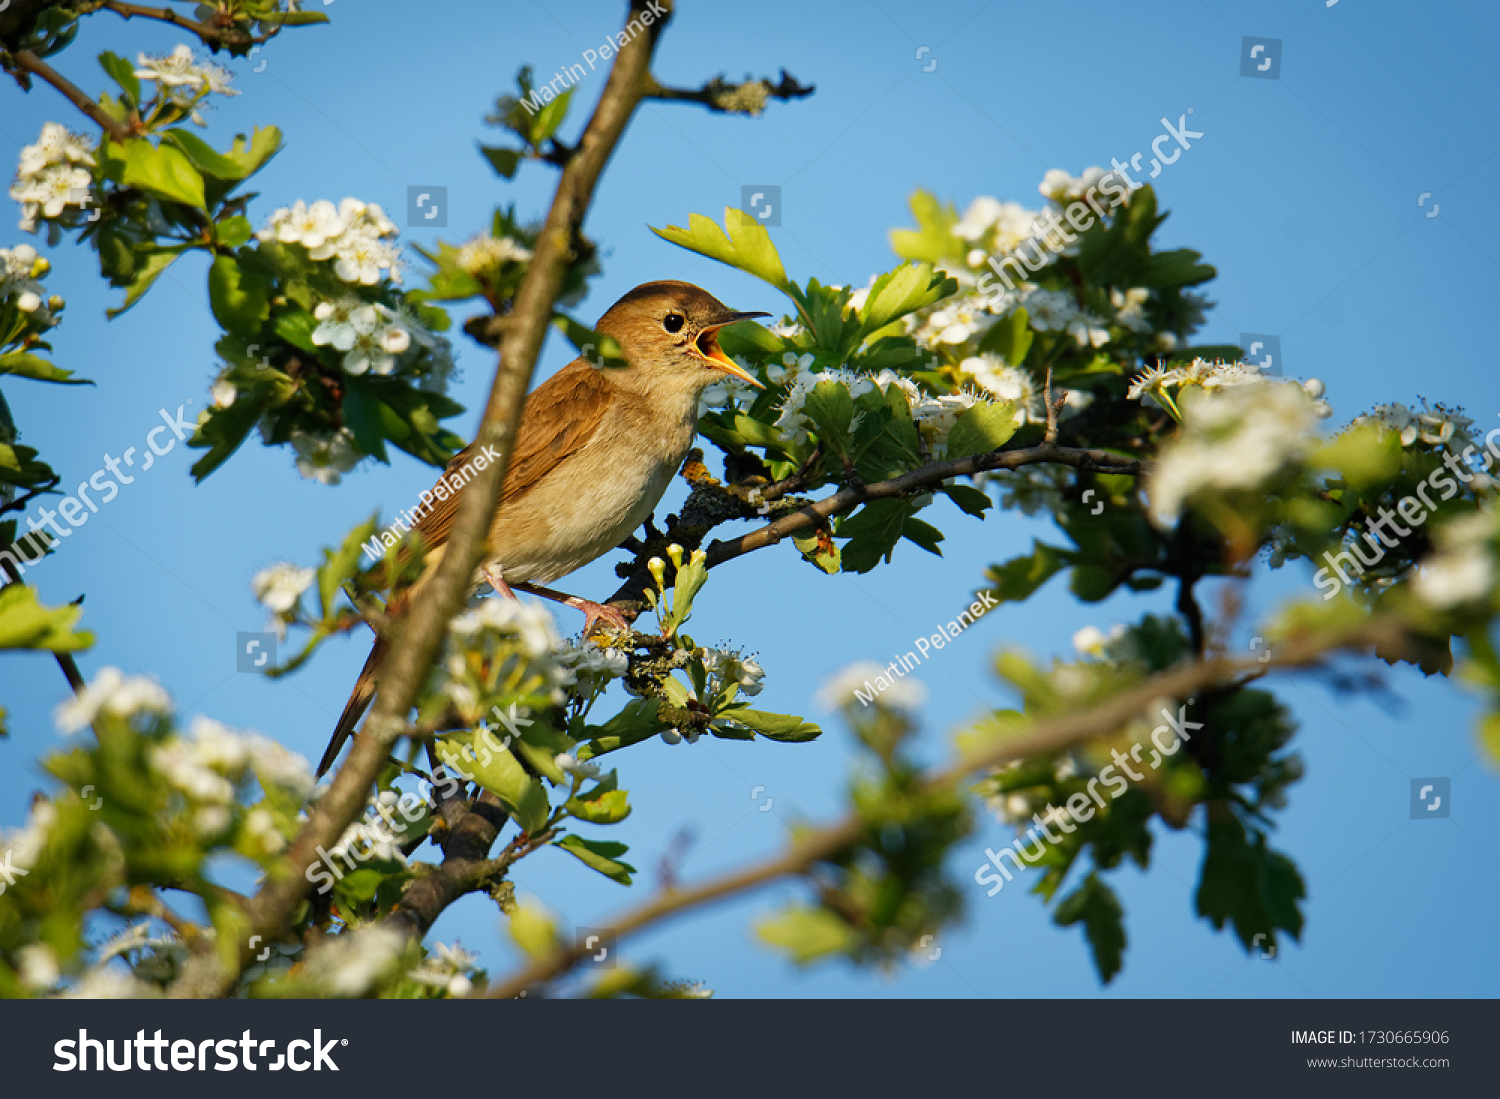 Common Nightingale - Luscinia megarhynchos also known as rufous nightingale, small passerine brown bird best known for its powerful and beautiful song, singing also in the night. #1730665906